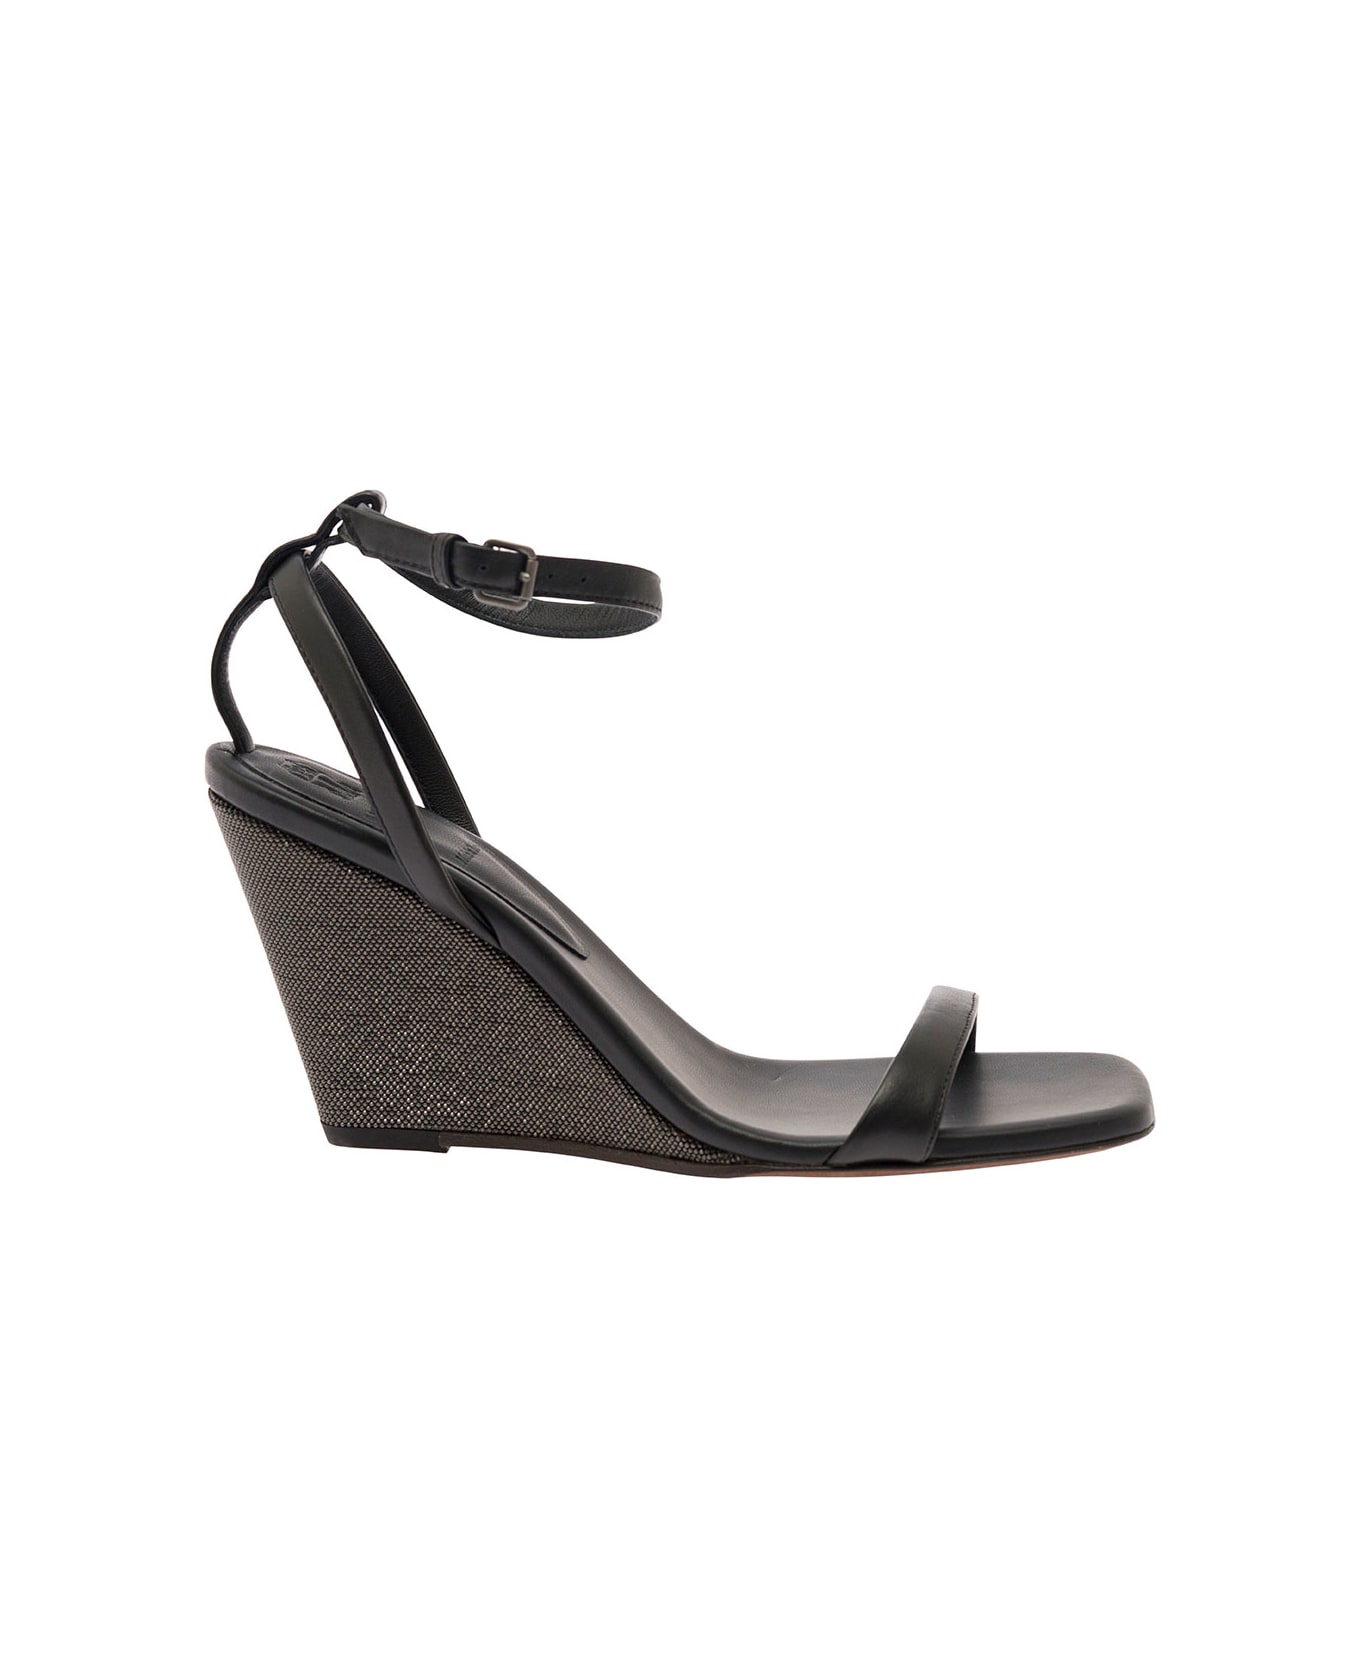 Brunello Cucinelli Black Wedge Sandals With Monile Detail In Leather Woman - Black